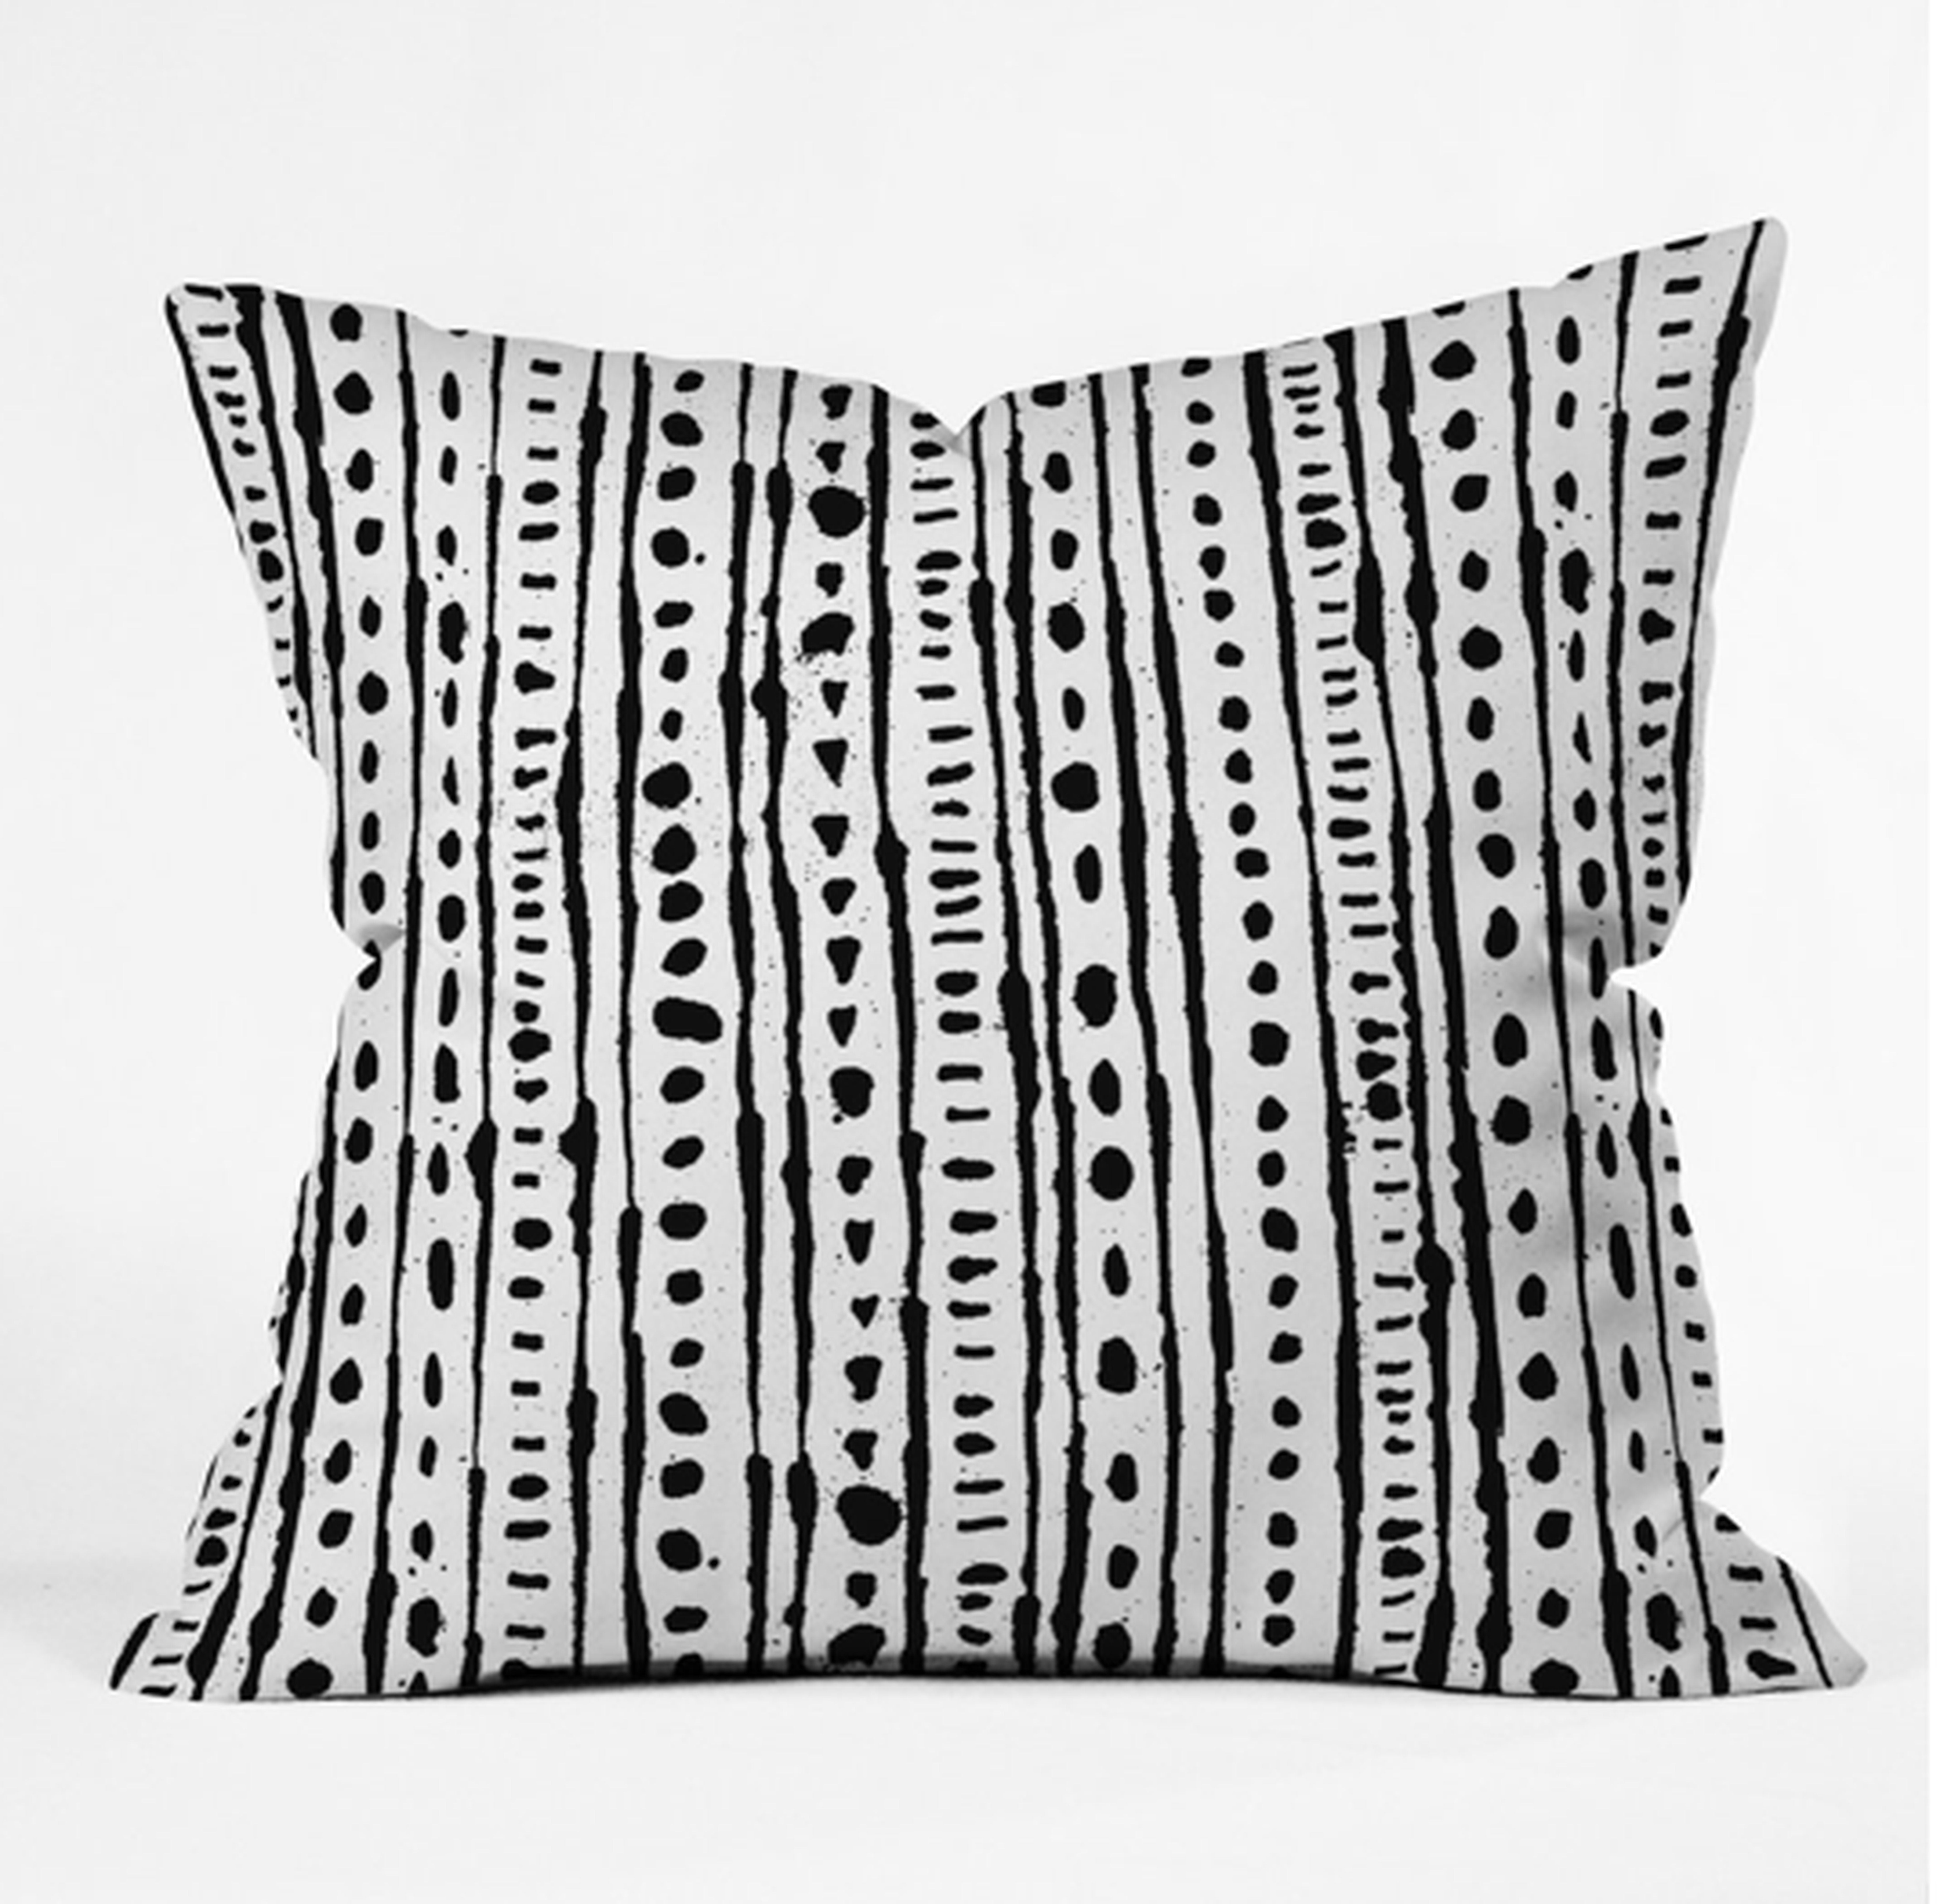 INK STRIPE Throw Pillow By Andi Bird 20 x 20" with insert - Wander Print Co.